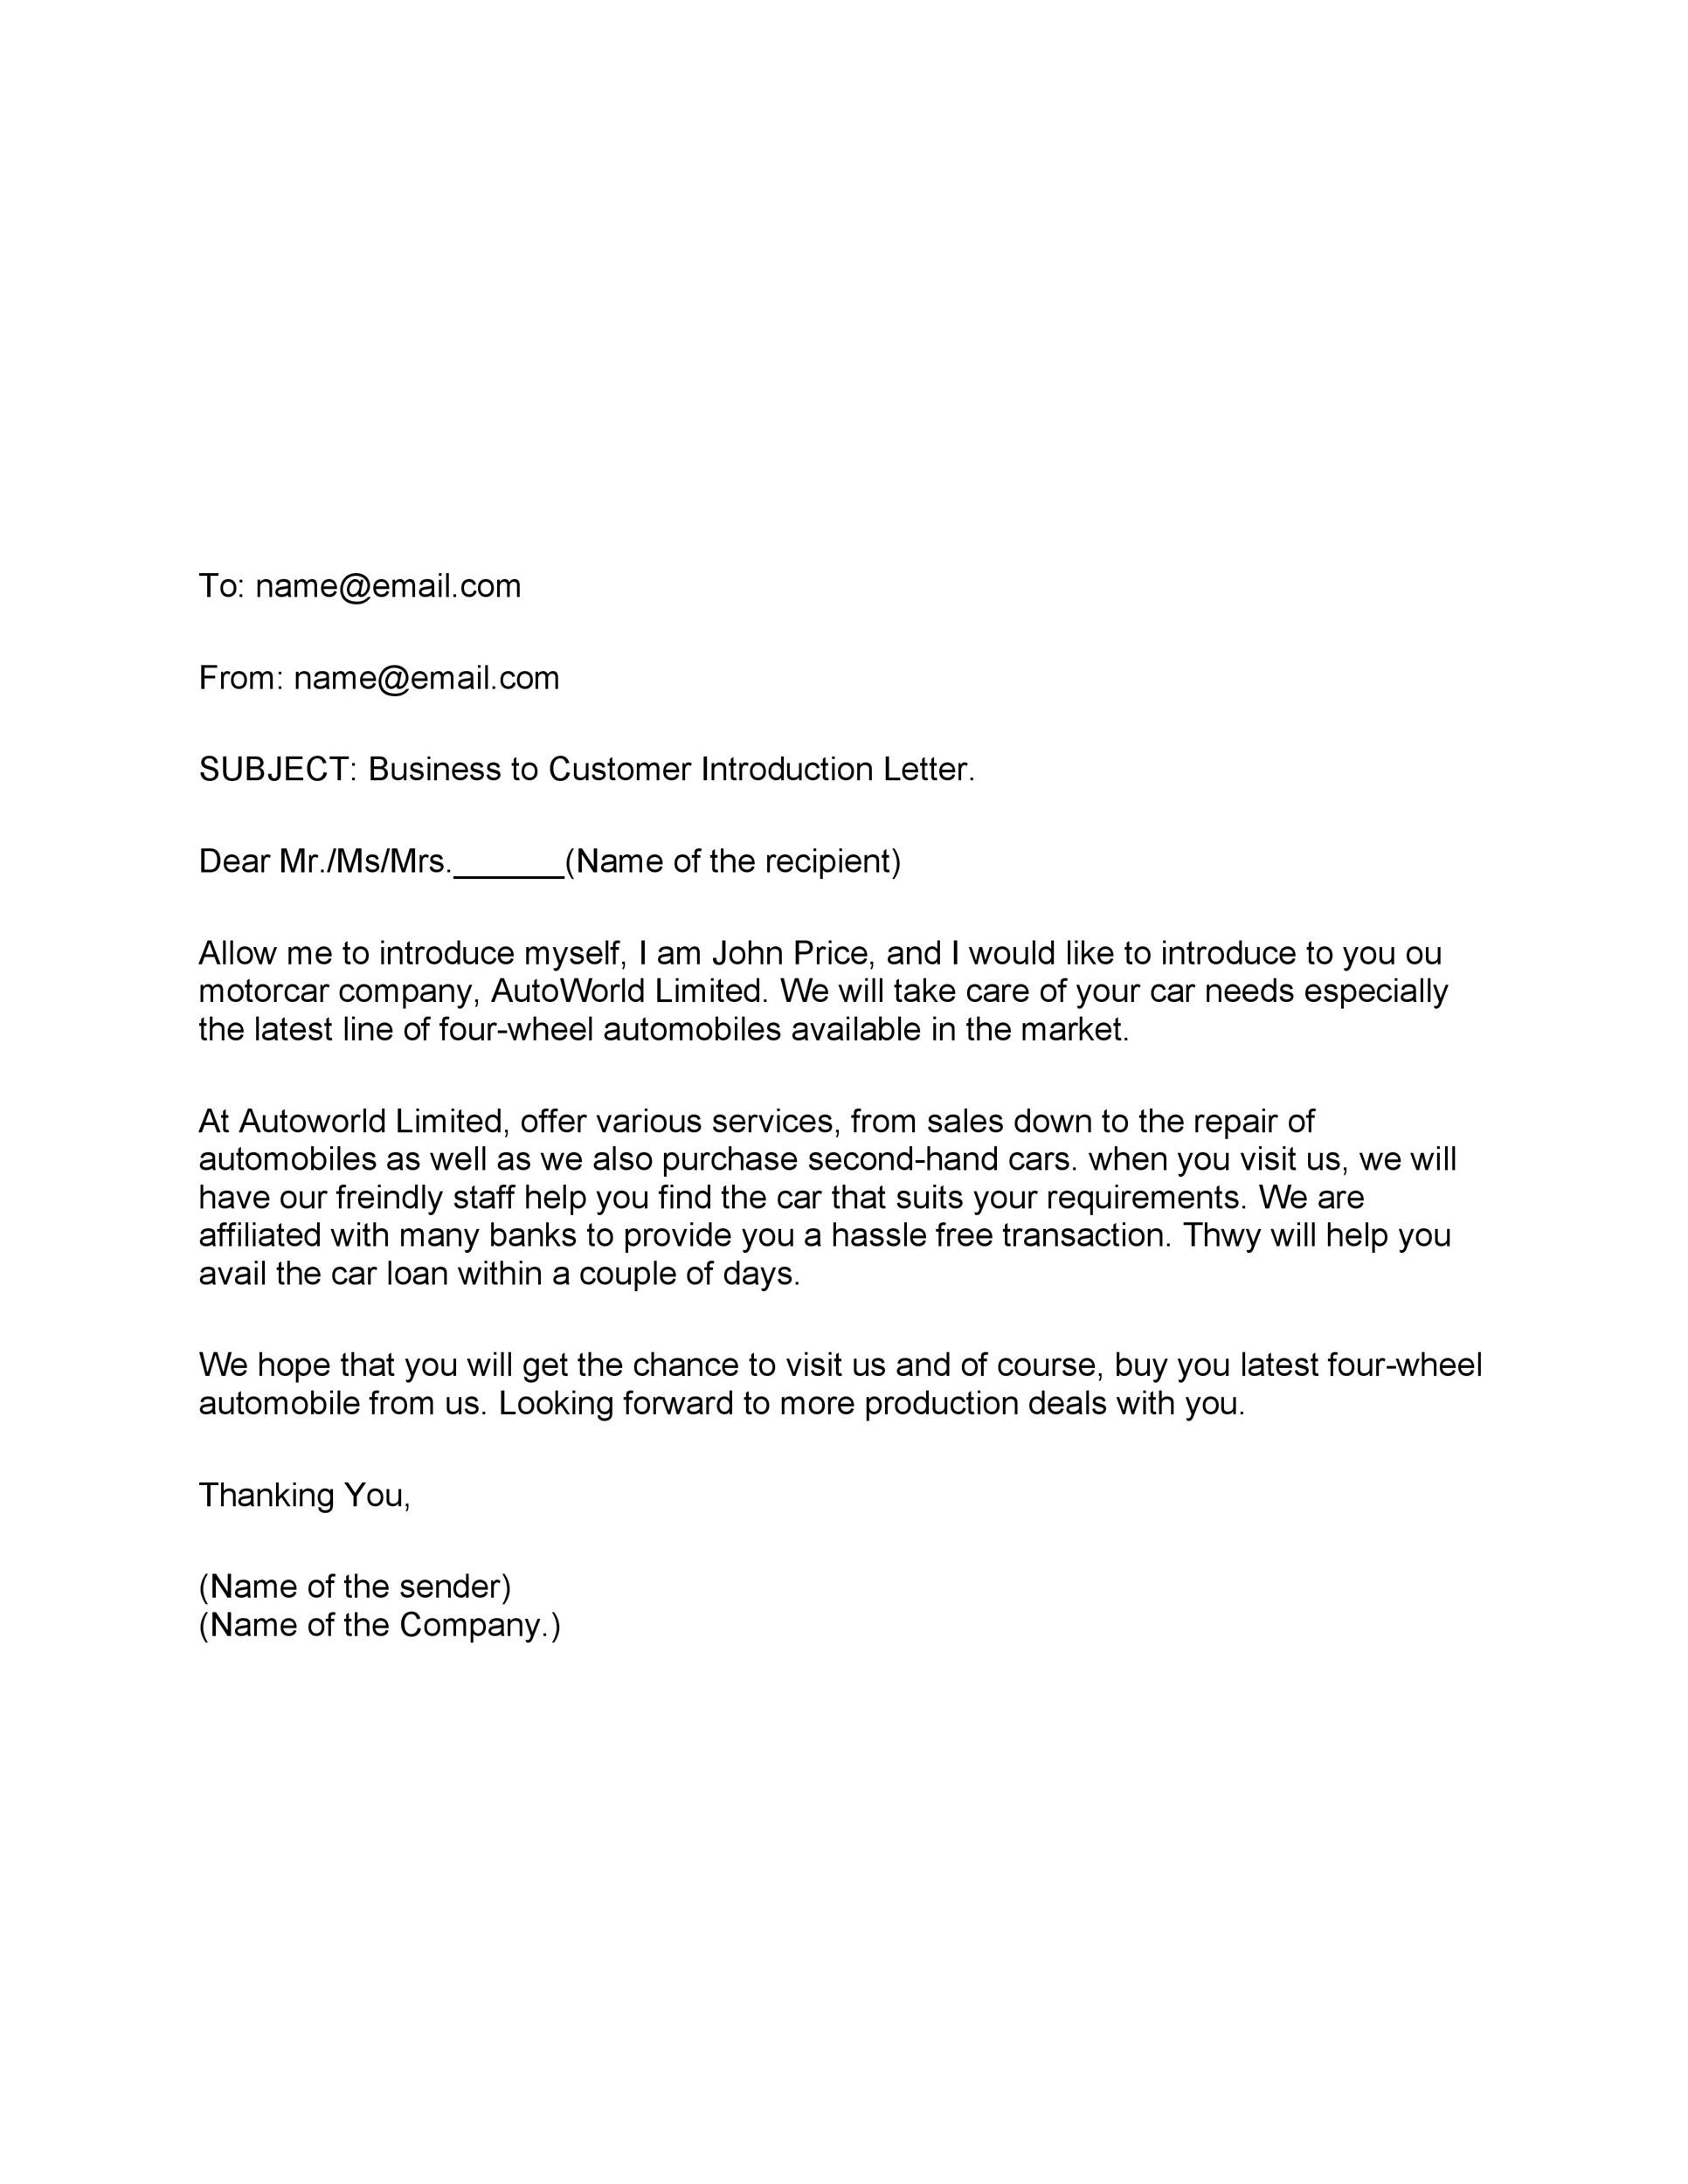 Sample Sales Letter To Potential Client from templatelab.com